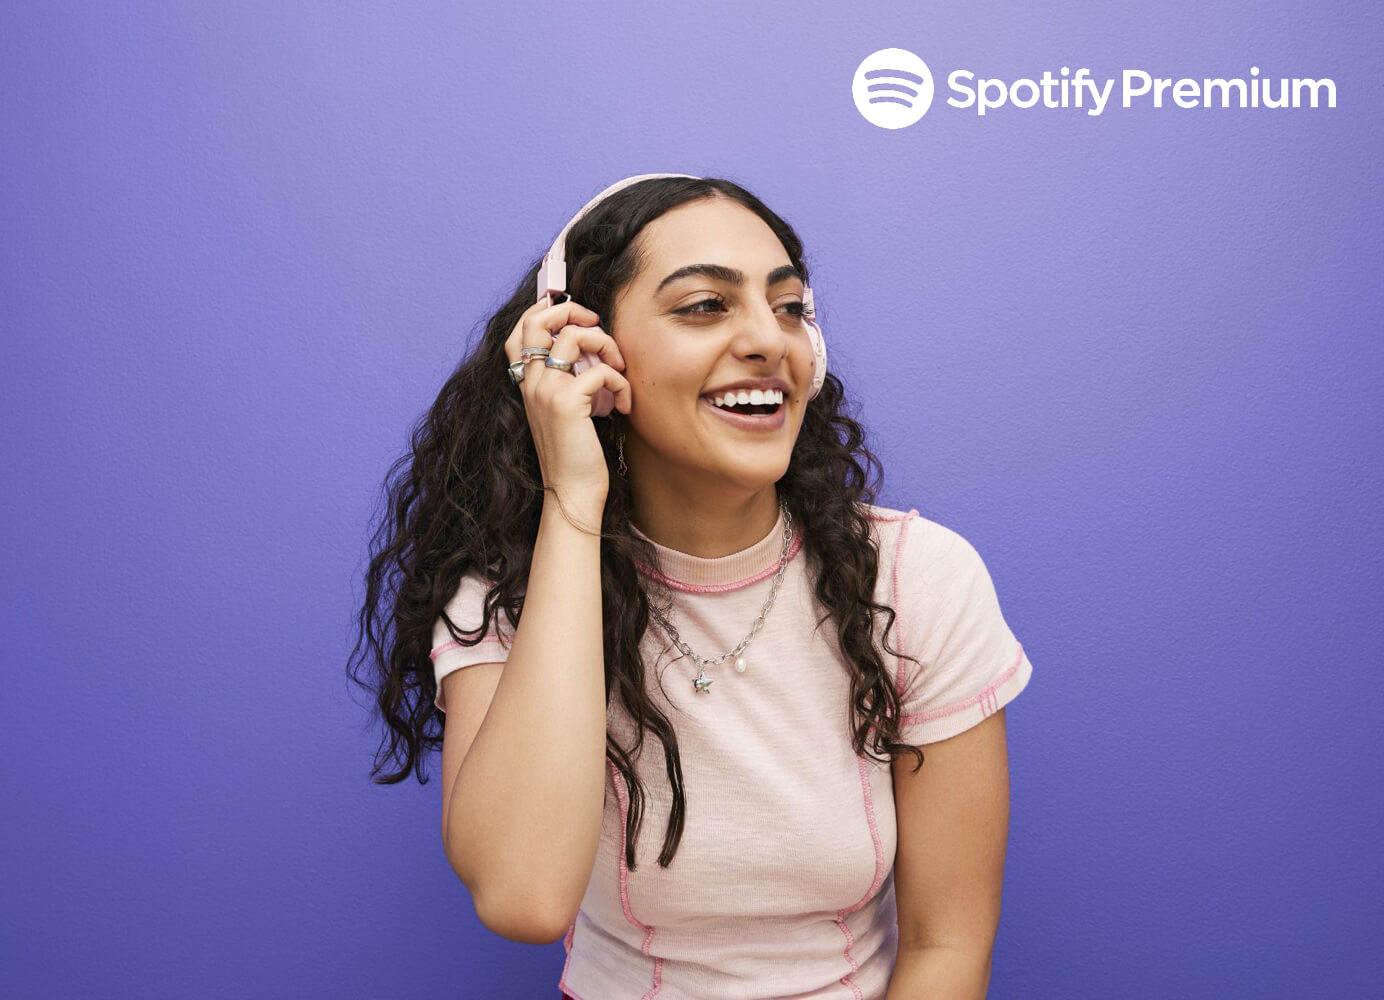 Get 4 months Spotify Premium with Telstra